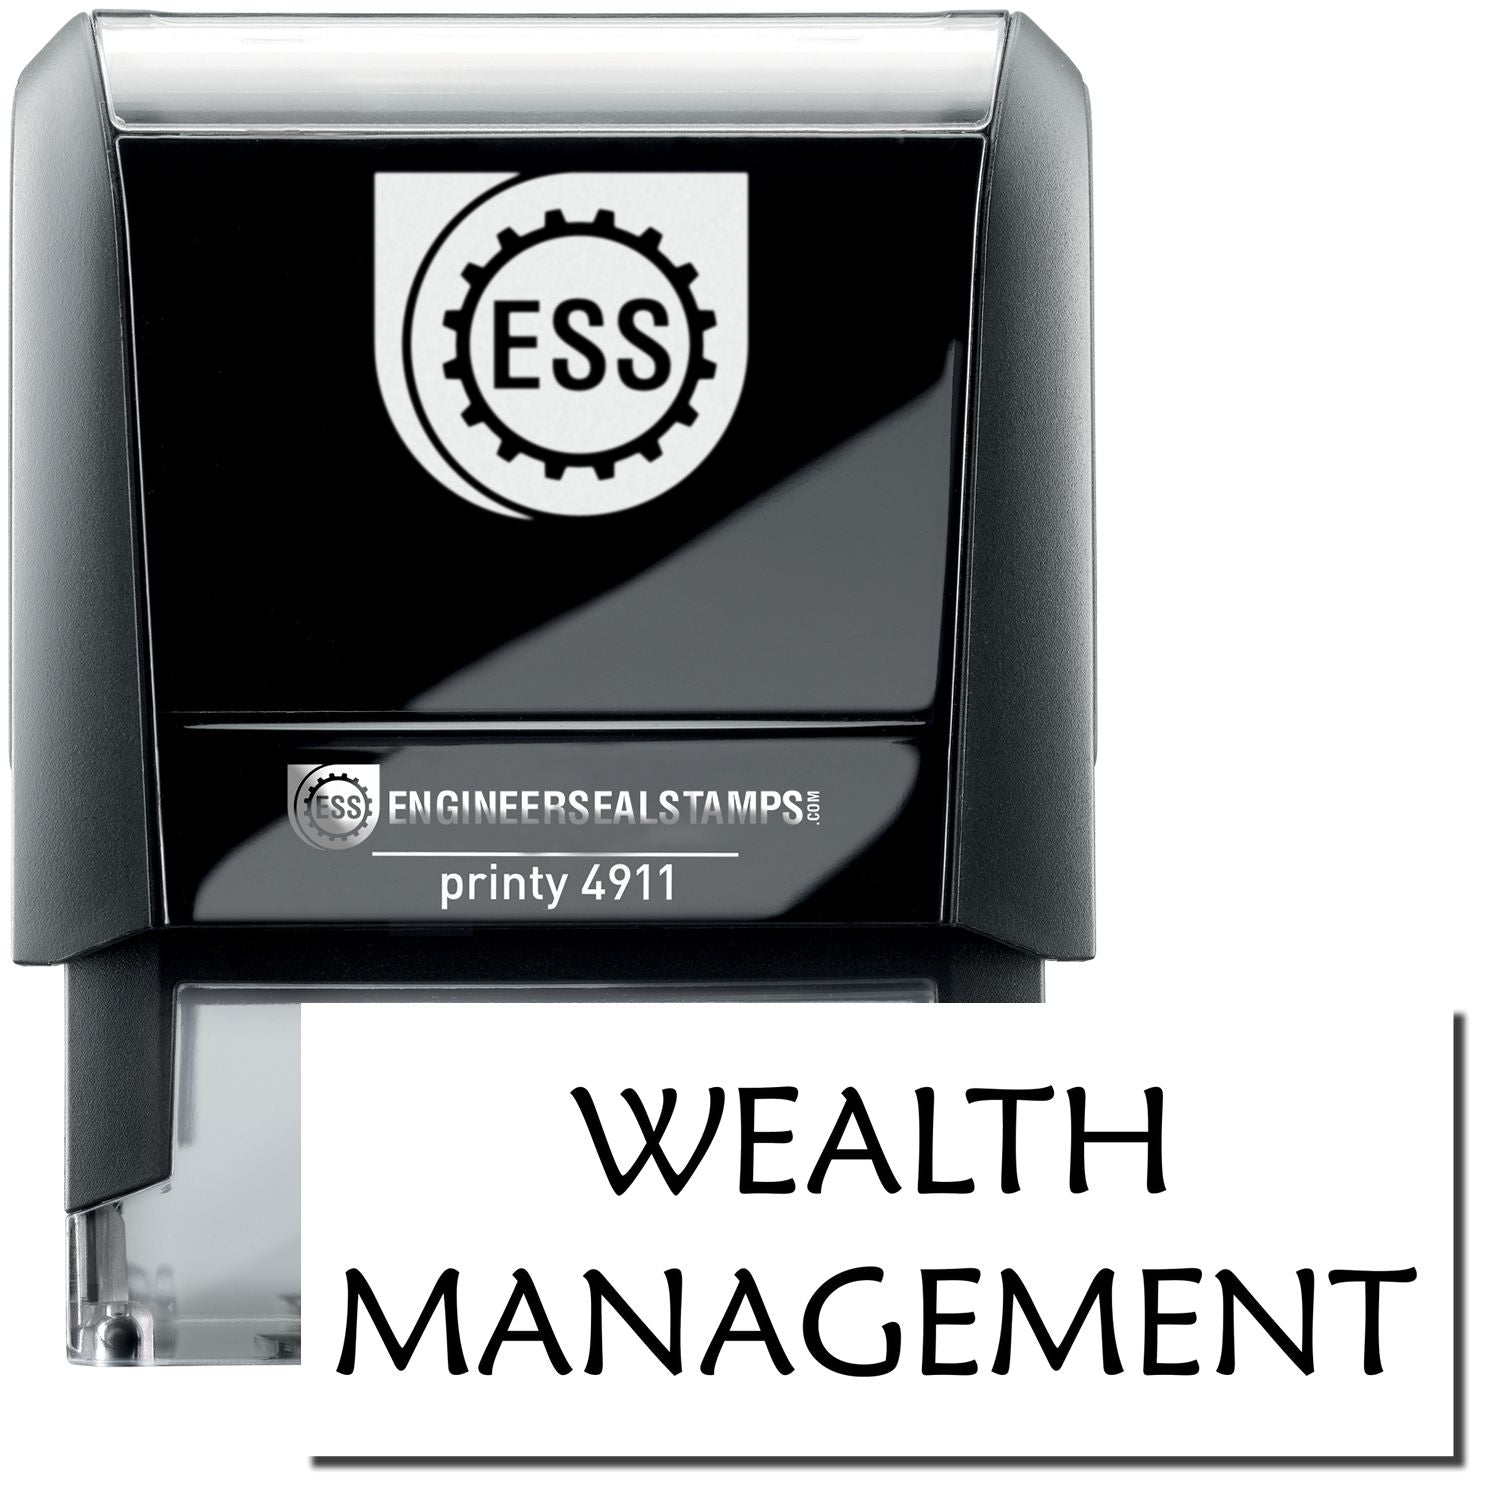 A self-inking stamp with a stamped image showing how the text "WEALTH MANAGEMENT" is displayed after stamping.